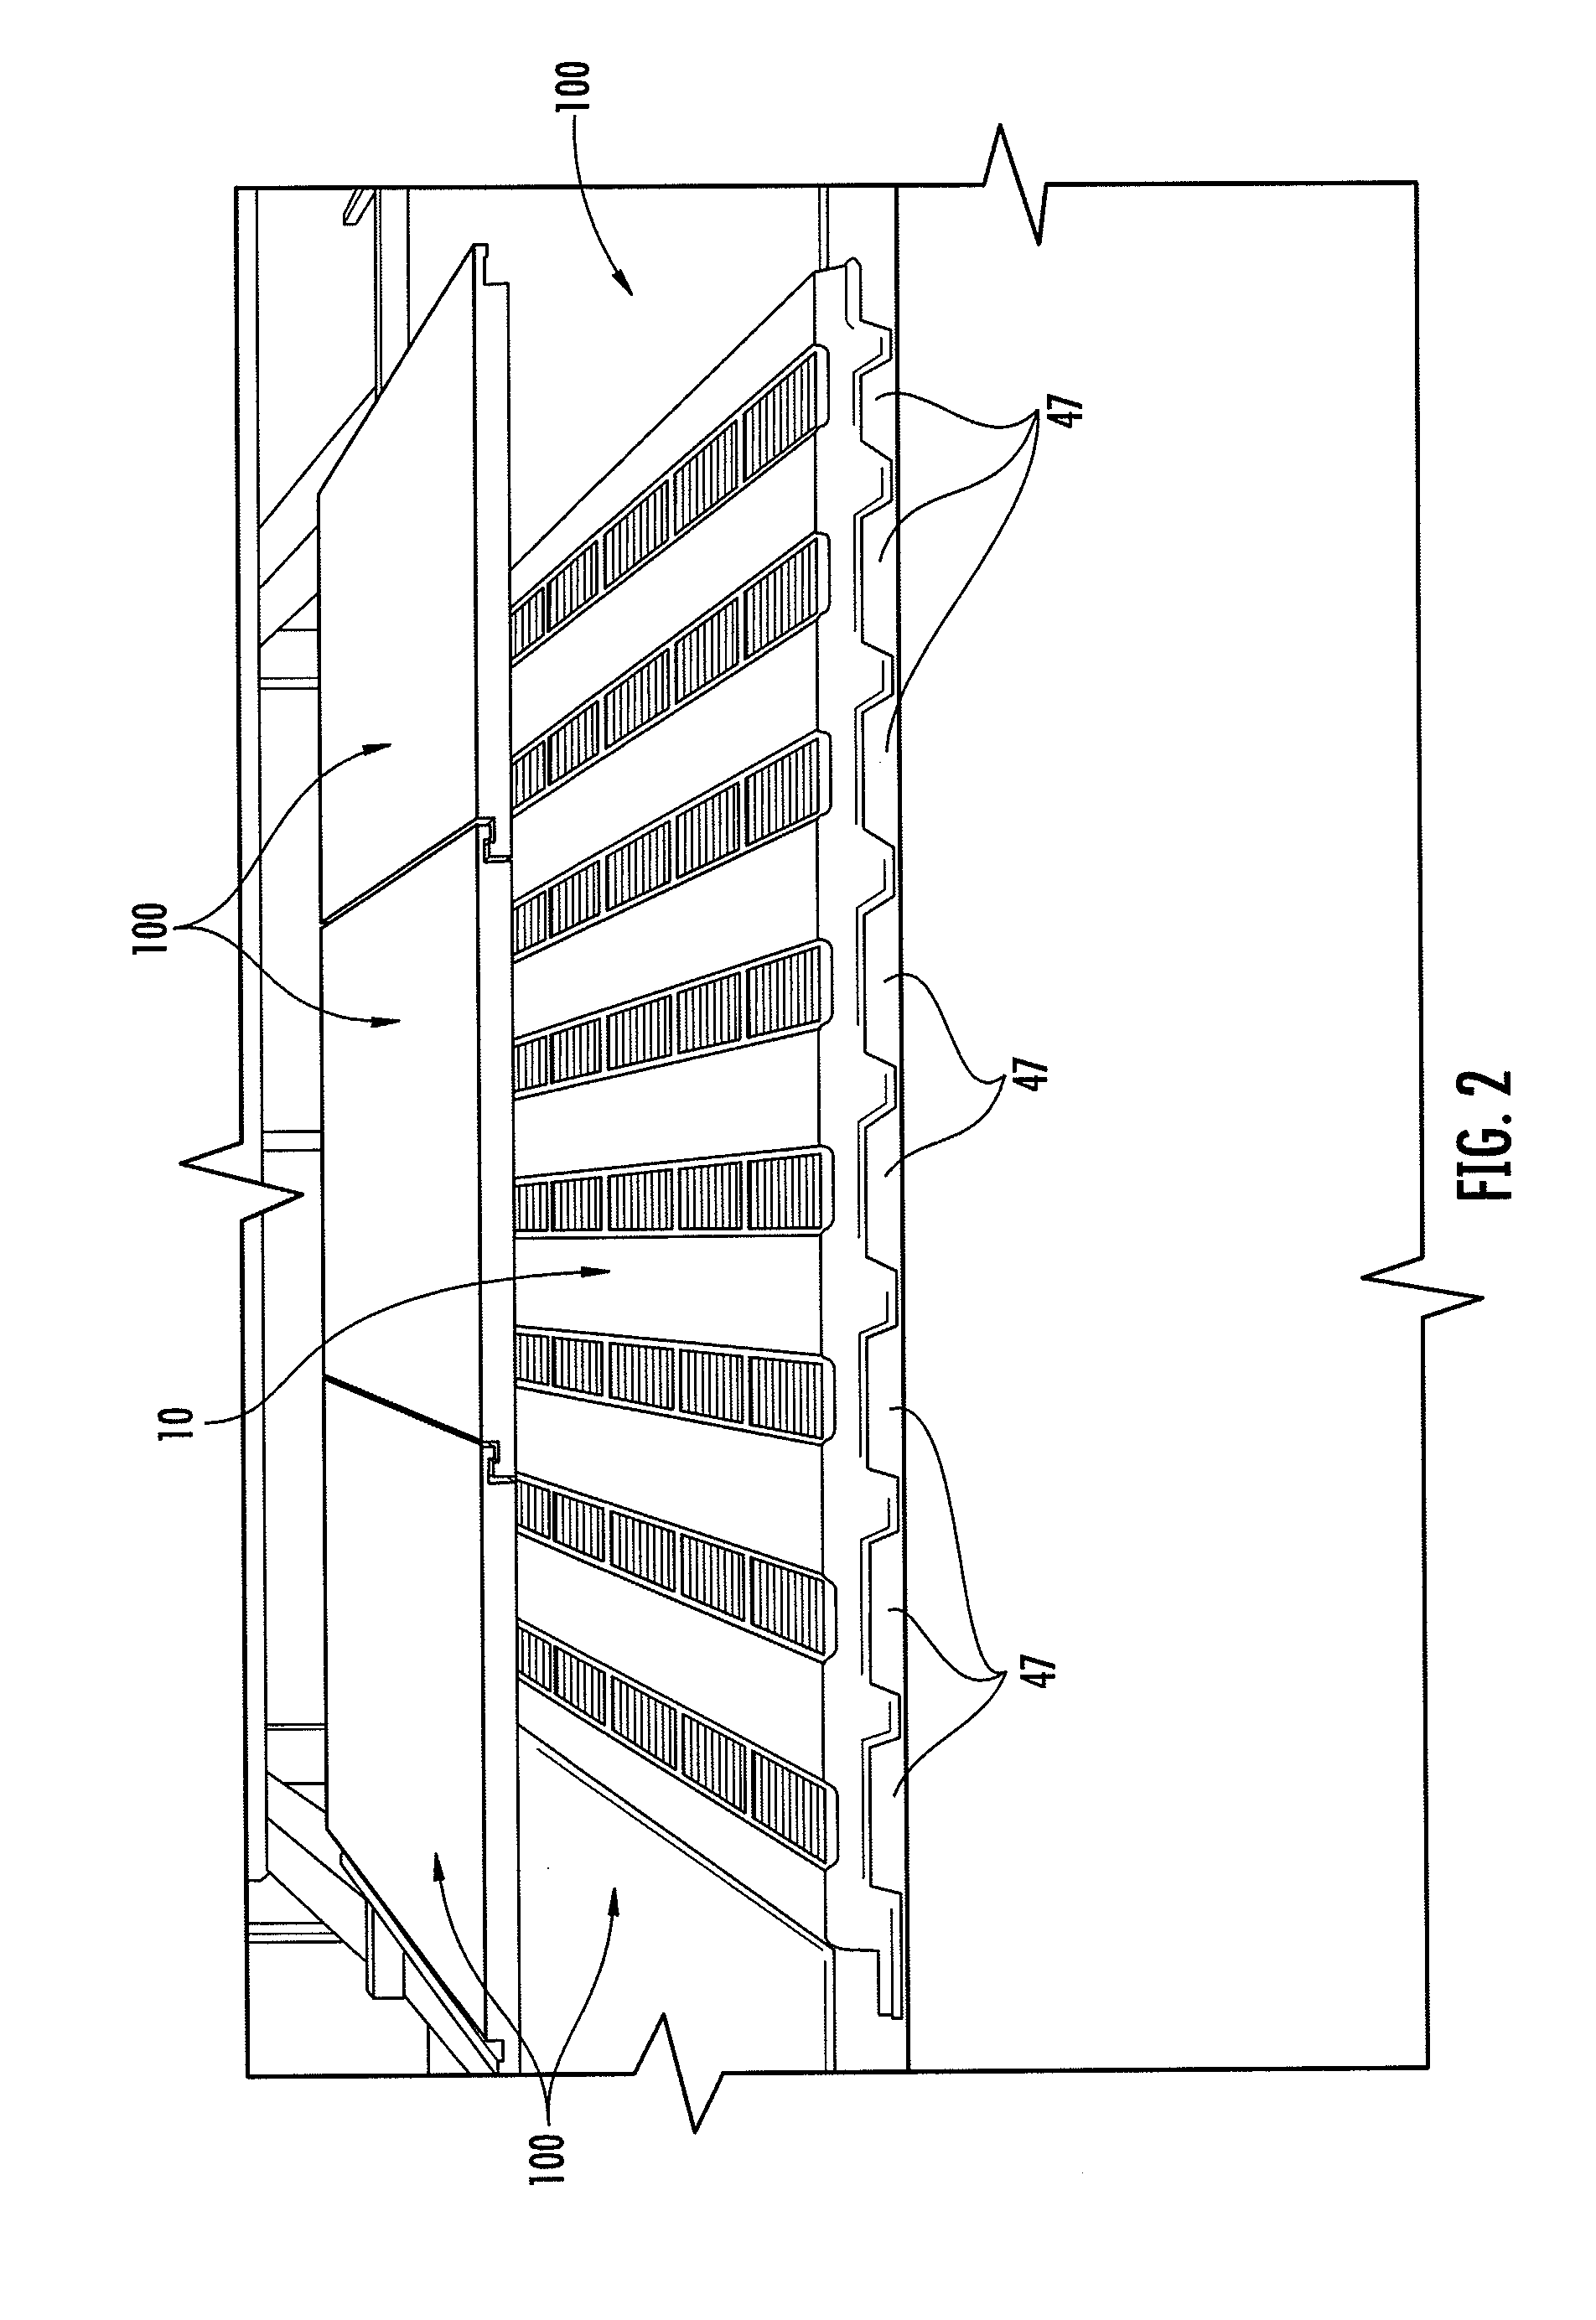 Roof vent having elongated baffles and discharge channels